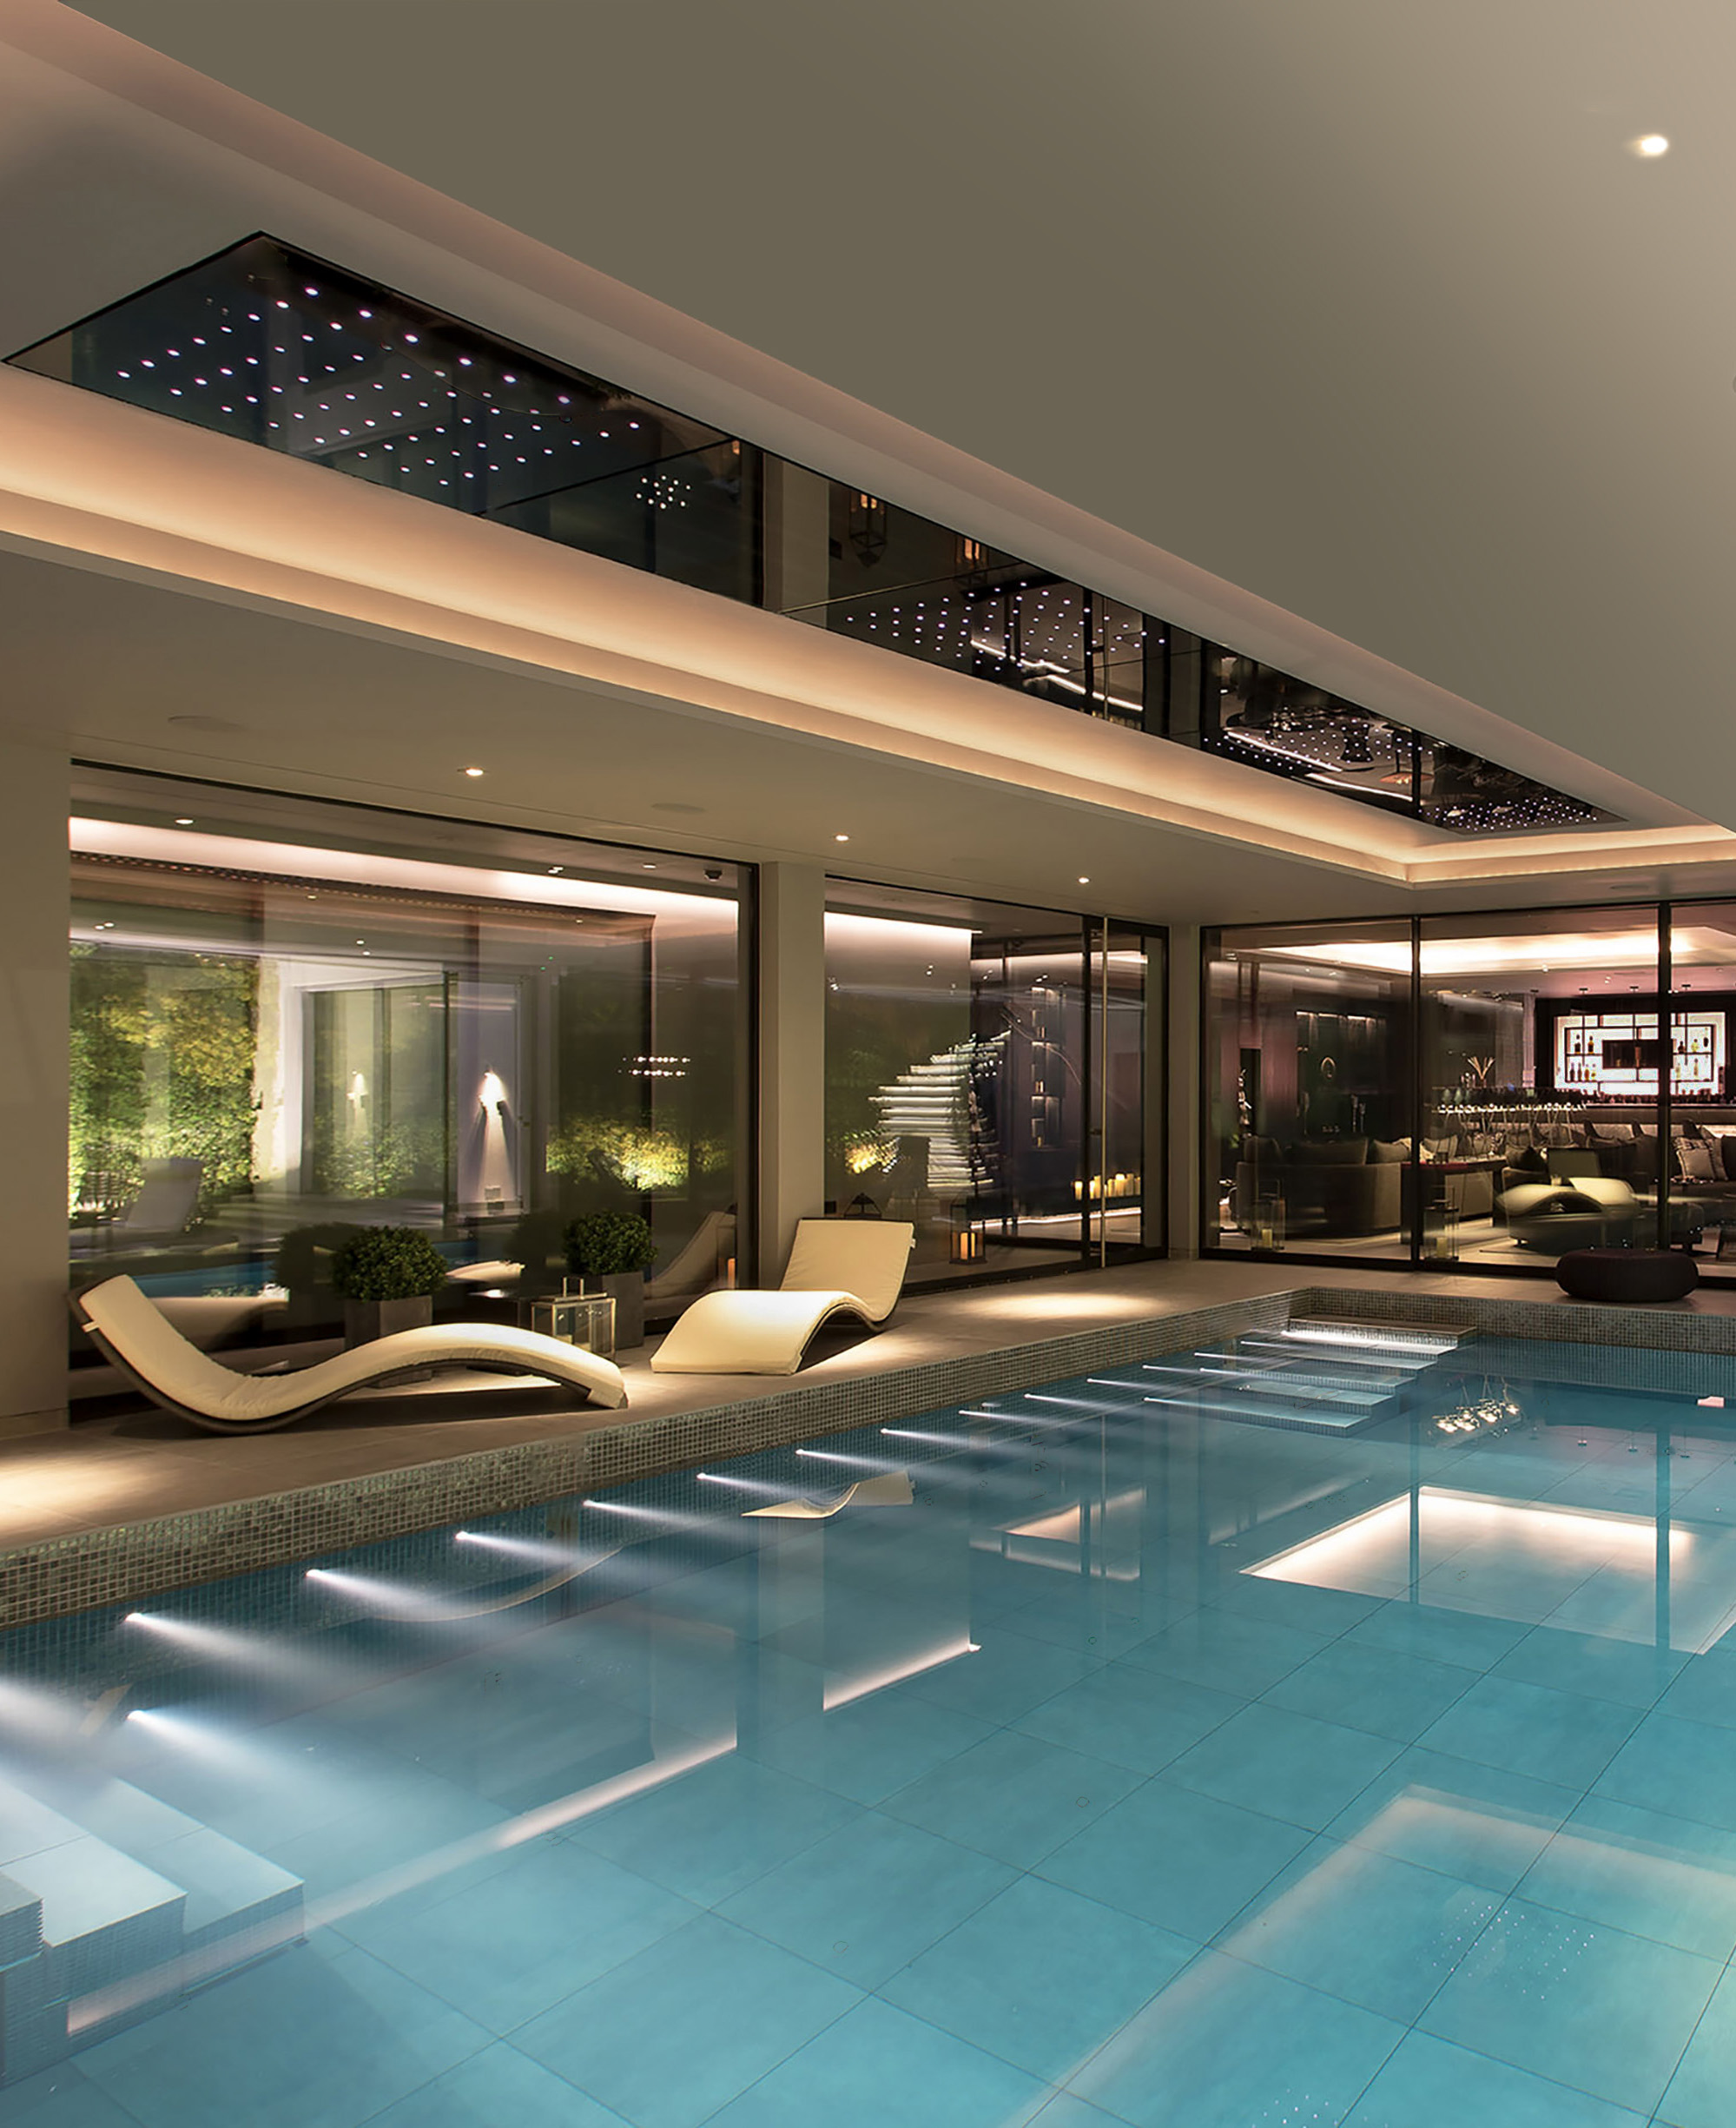 Indoor personal pool for luxury contemporary home: Links Way project designed by Luxury London Interiors firm: Moderno Interiors.